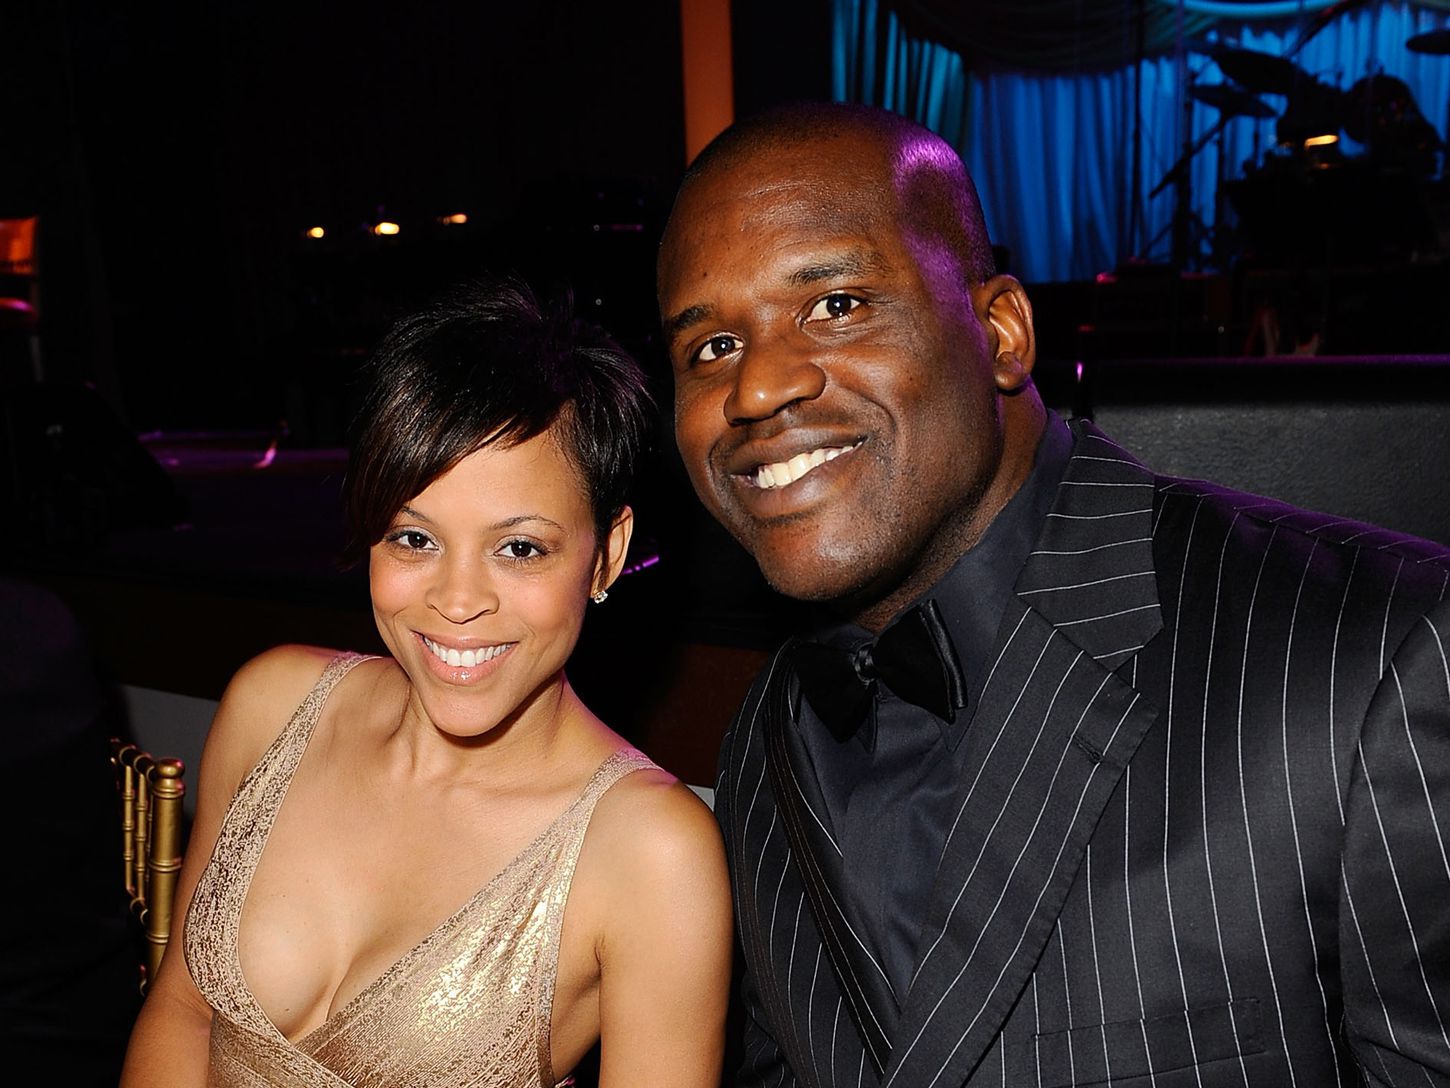 Shaquille has only been married once to his wife, Shaunie O’Neal.